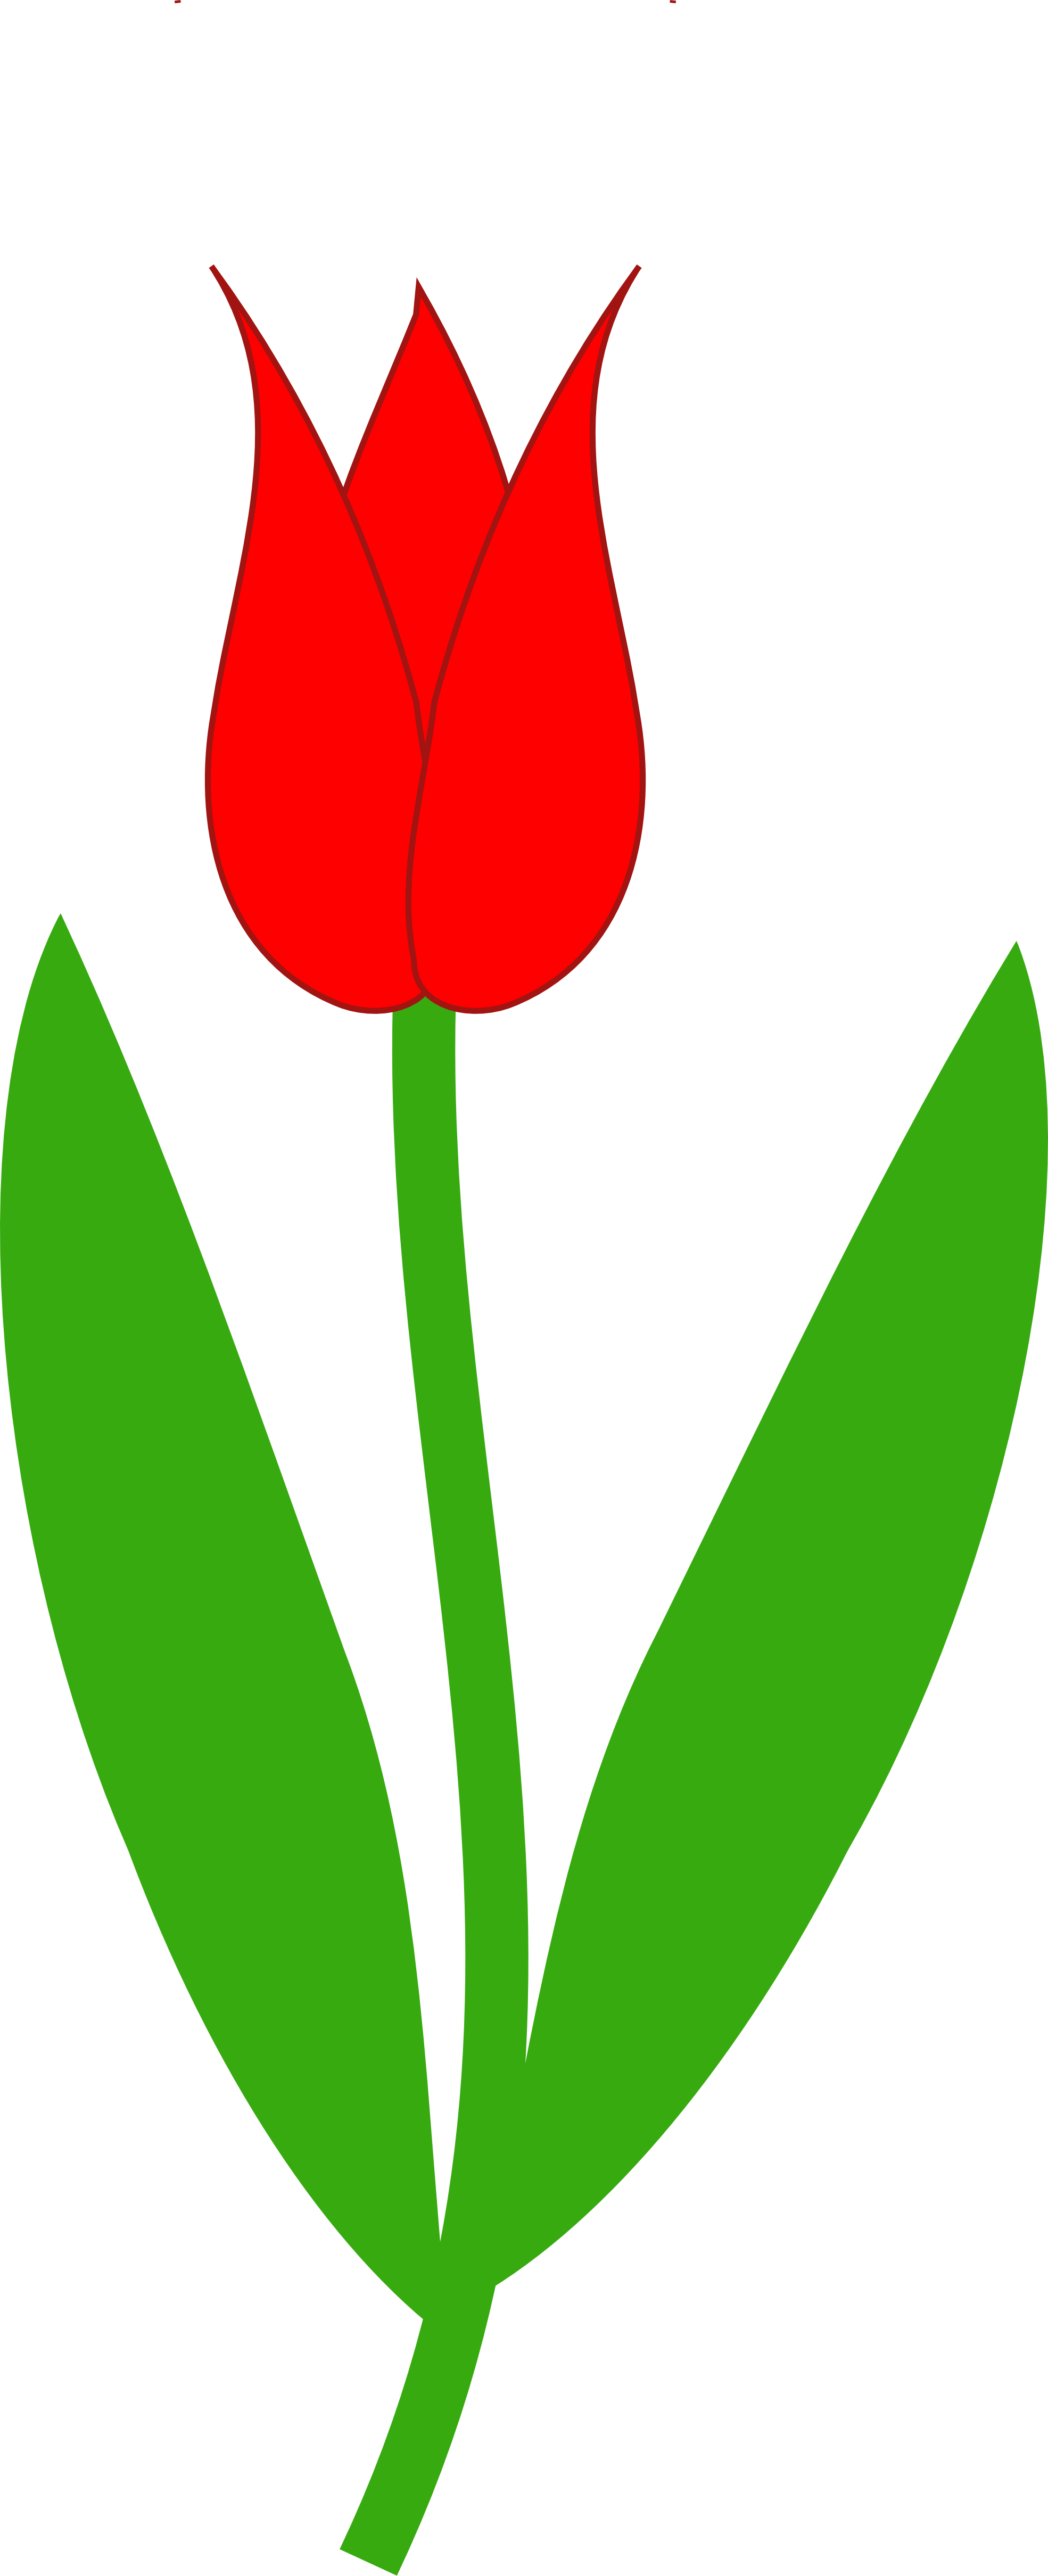 Red Tulips Clipart